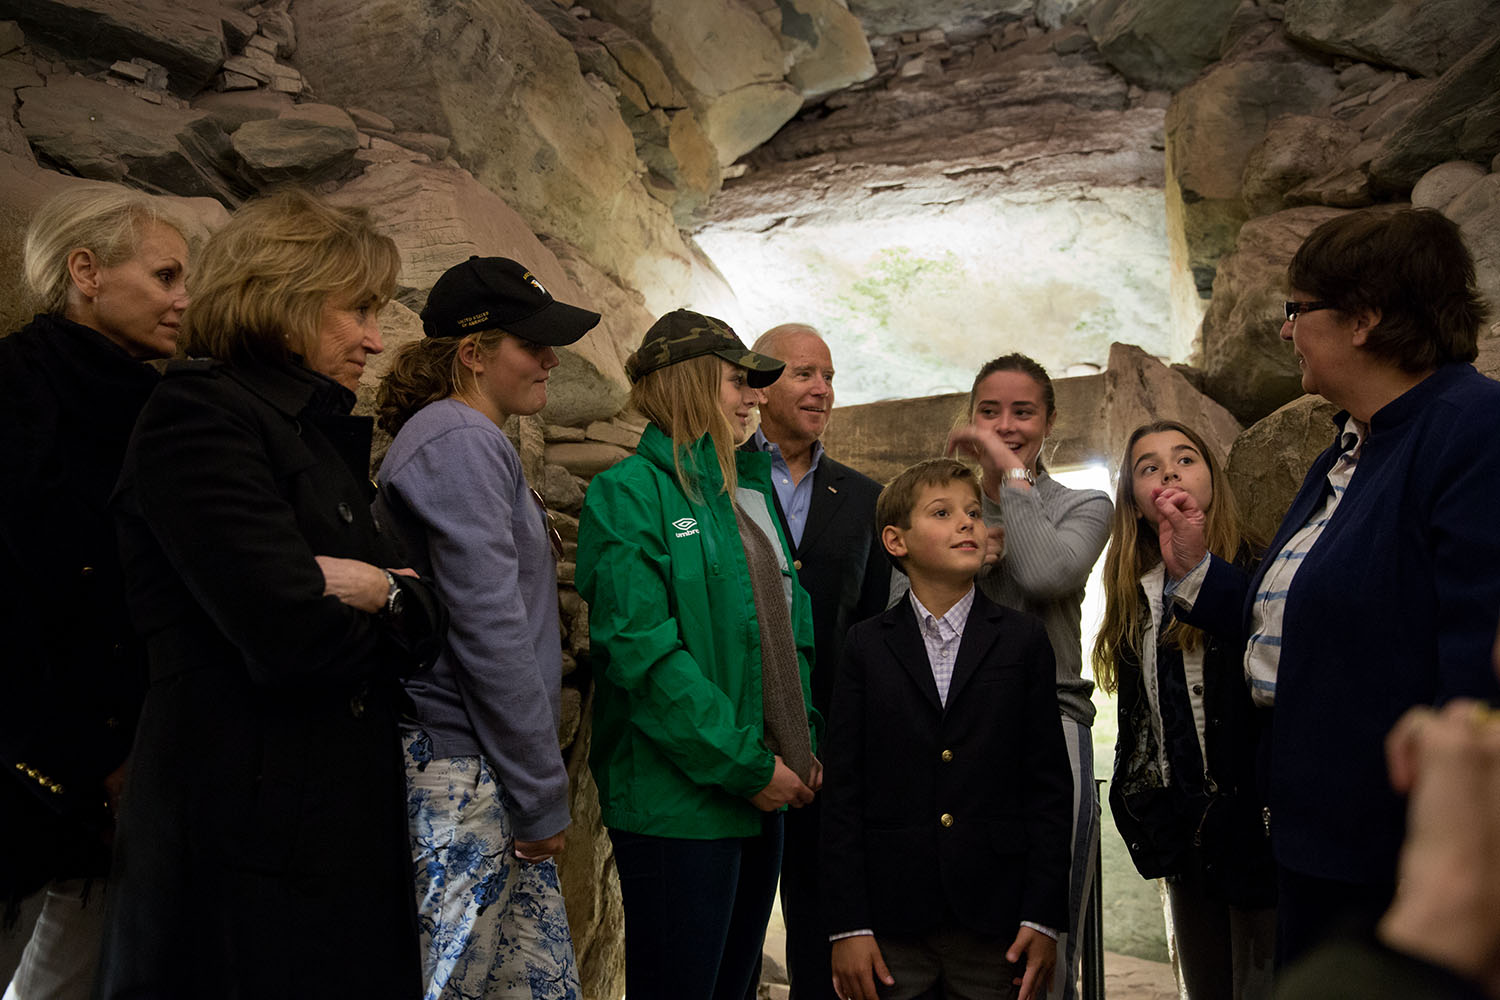 Vice President Joe Biden visits Newgrange, a pre historic, world heritage site, built between 3000 and 2500 BC, with members of his family, in Ireland, June 25, 2016. (Official White House Photo by David Lienemann)